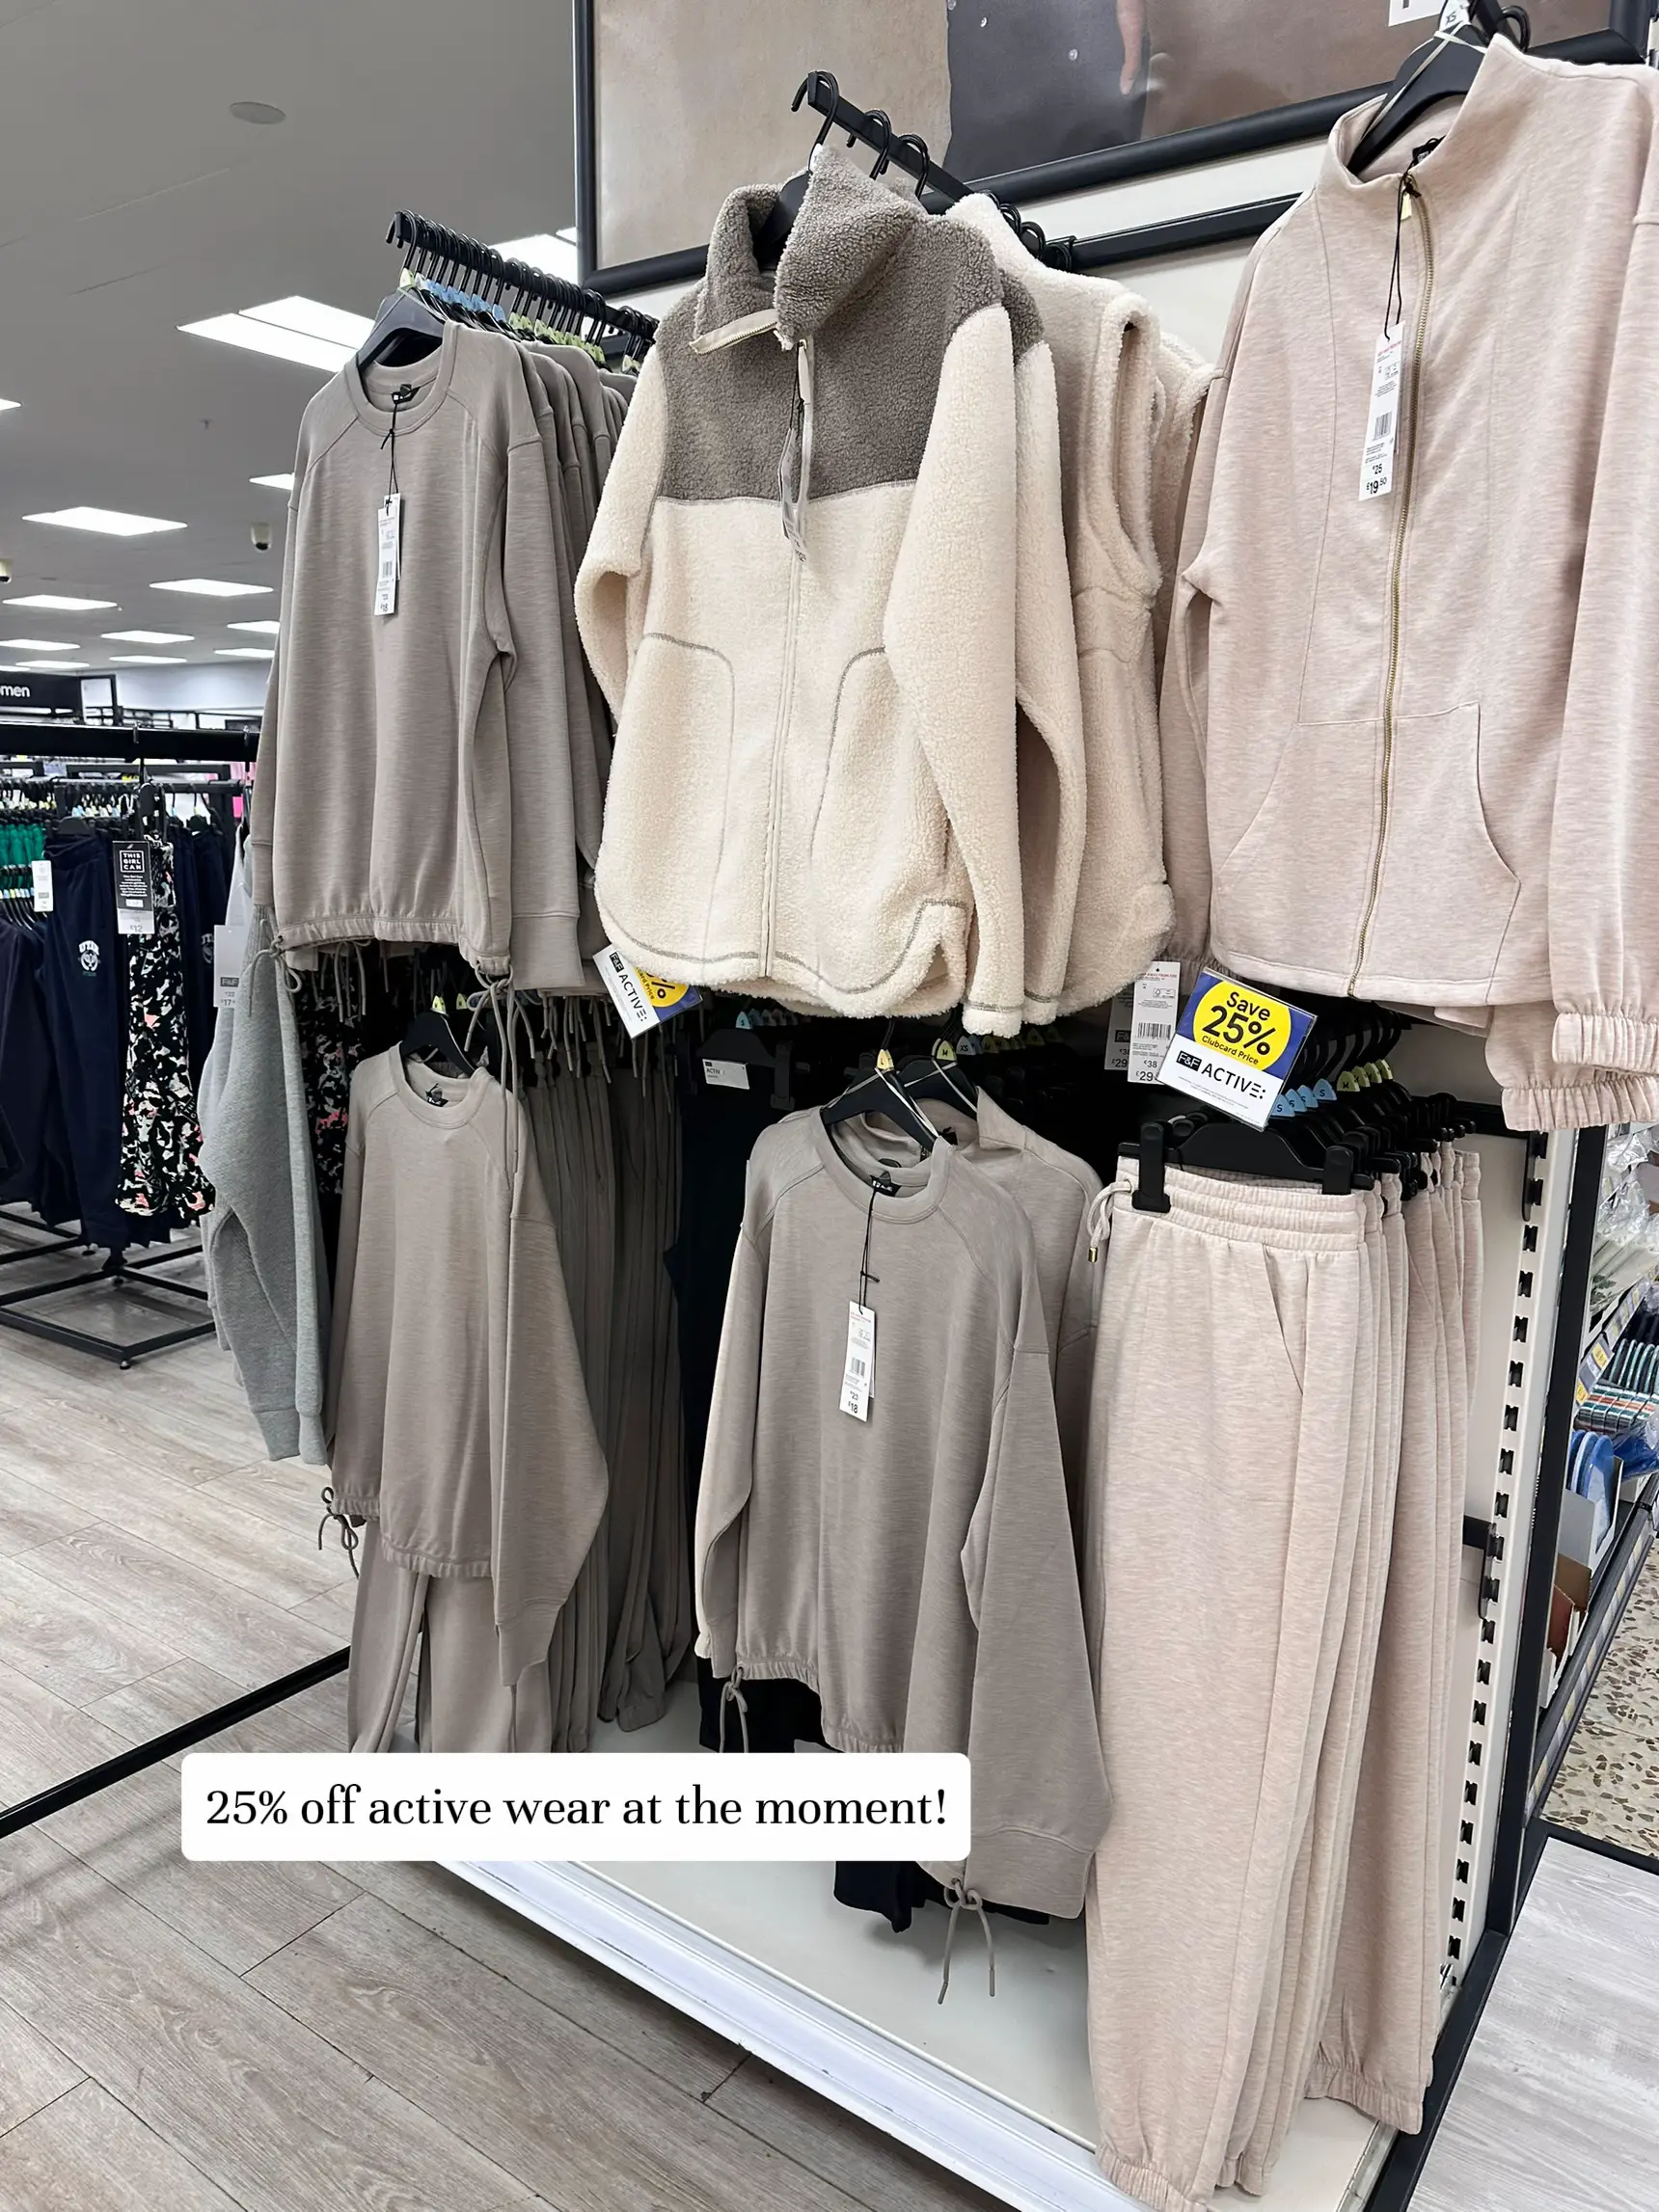 F&F clothing tesco sale now on instore up to 50% off